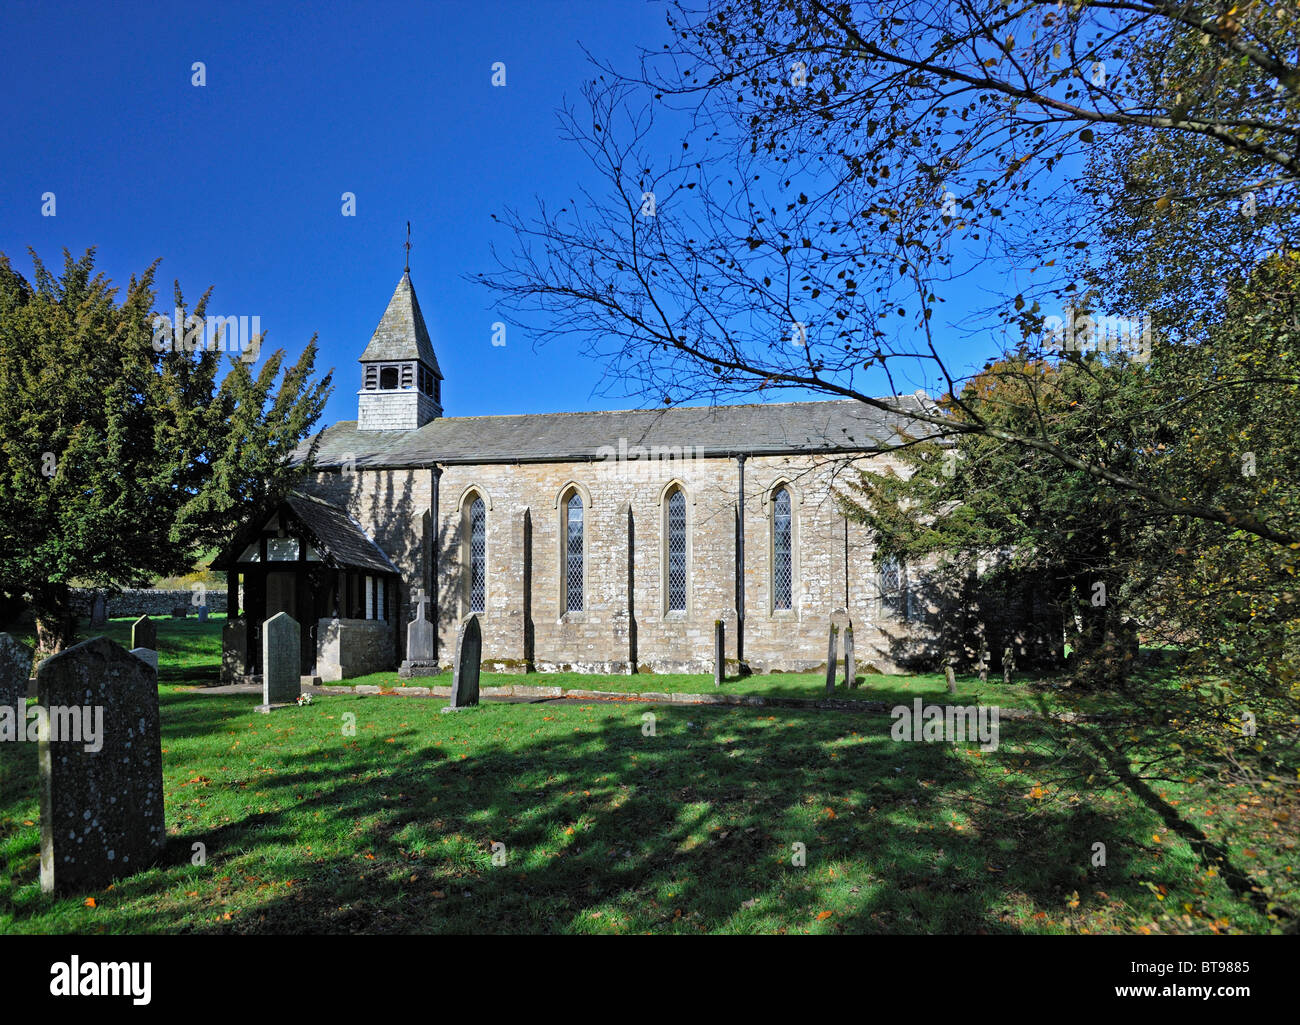 Church of Saint John the Evangelist. Cowgill, Dentdale, Yorkshire Dales National Park, Cumbria, England, United Kingdom, Europe. Stock Photo